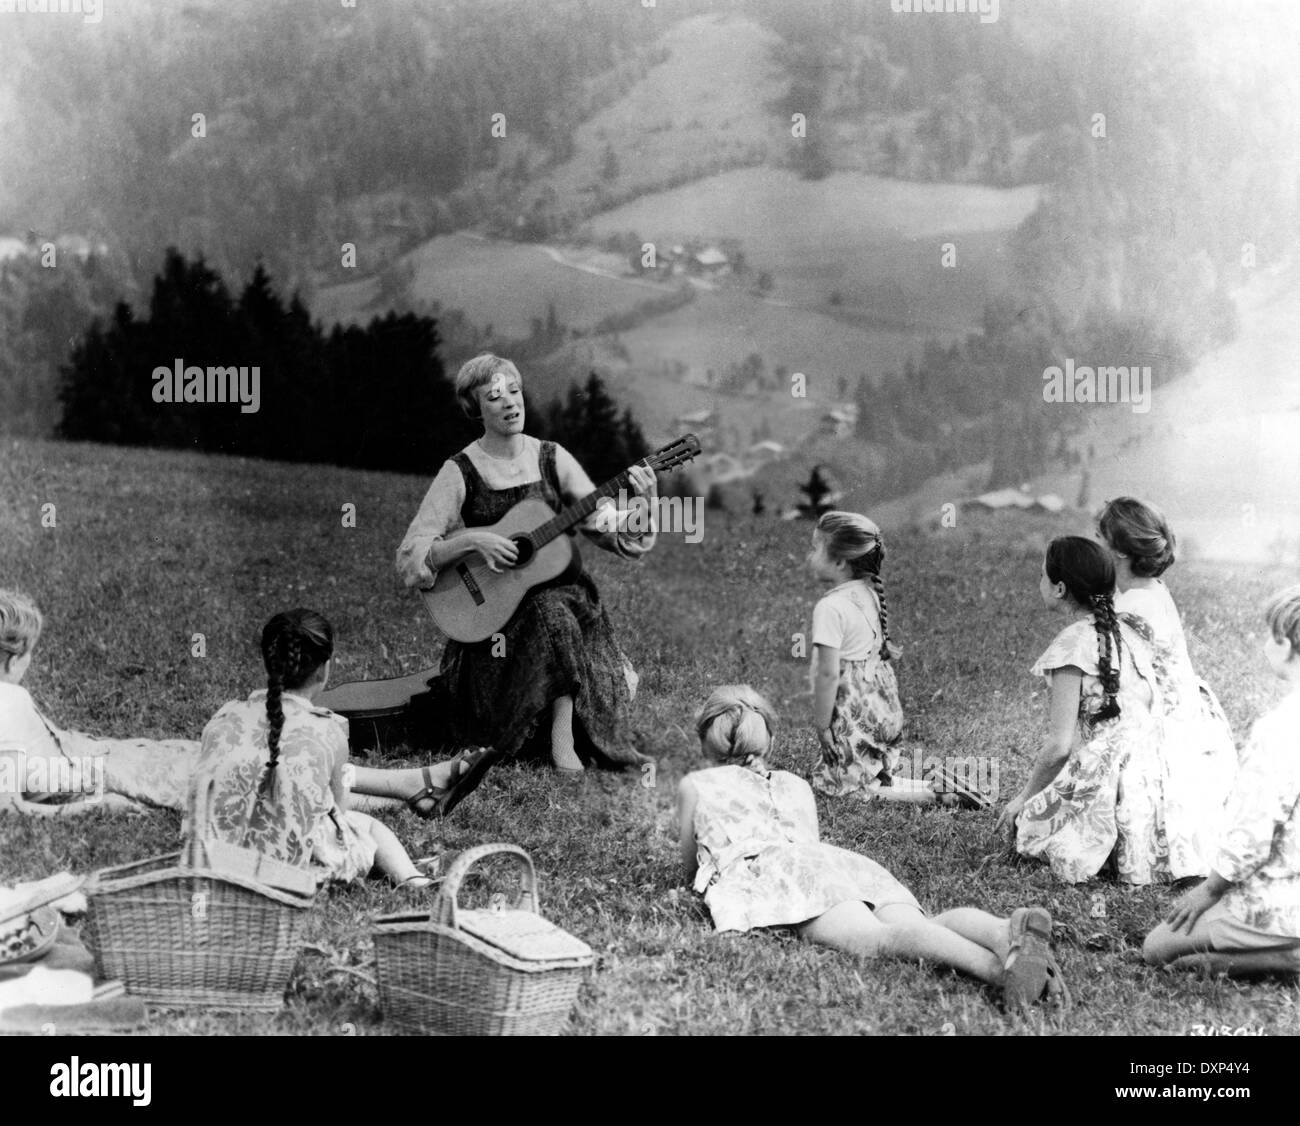 THE SOUND OF MUSIC Stock Photo